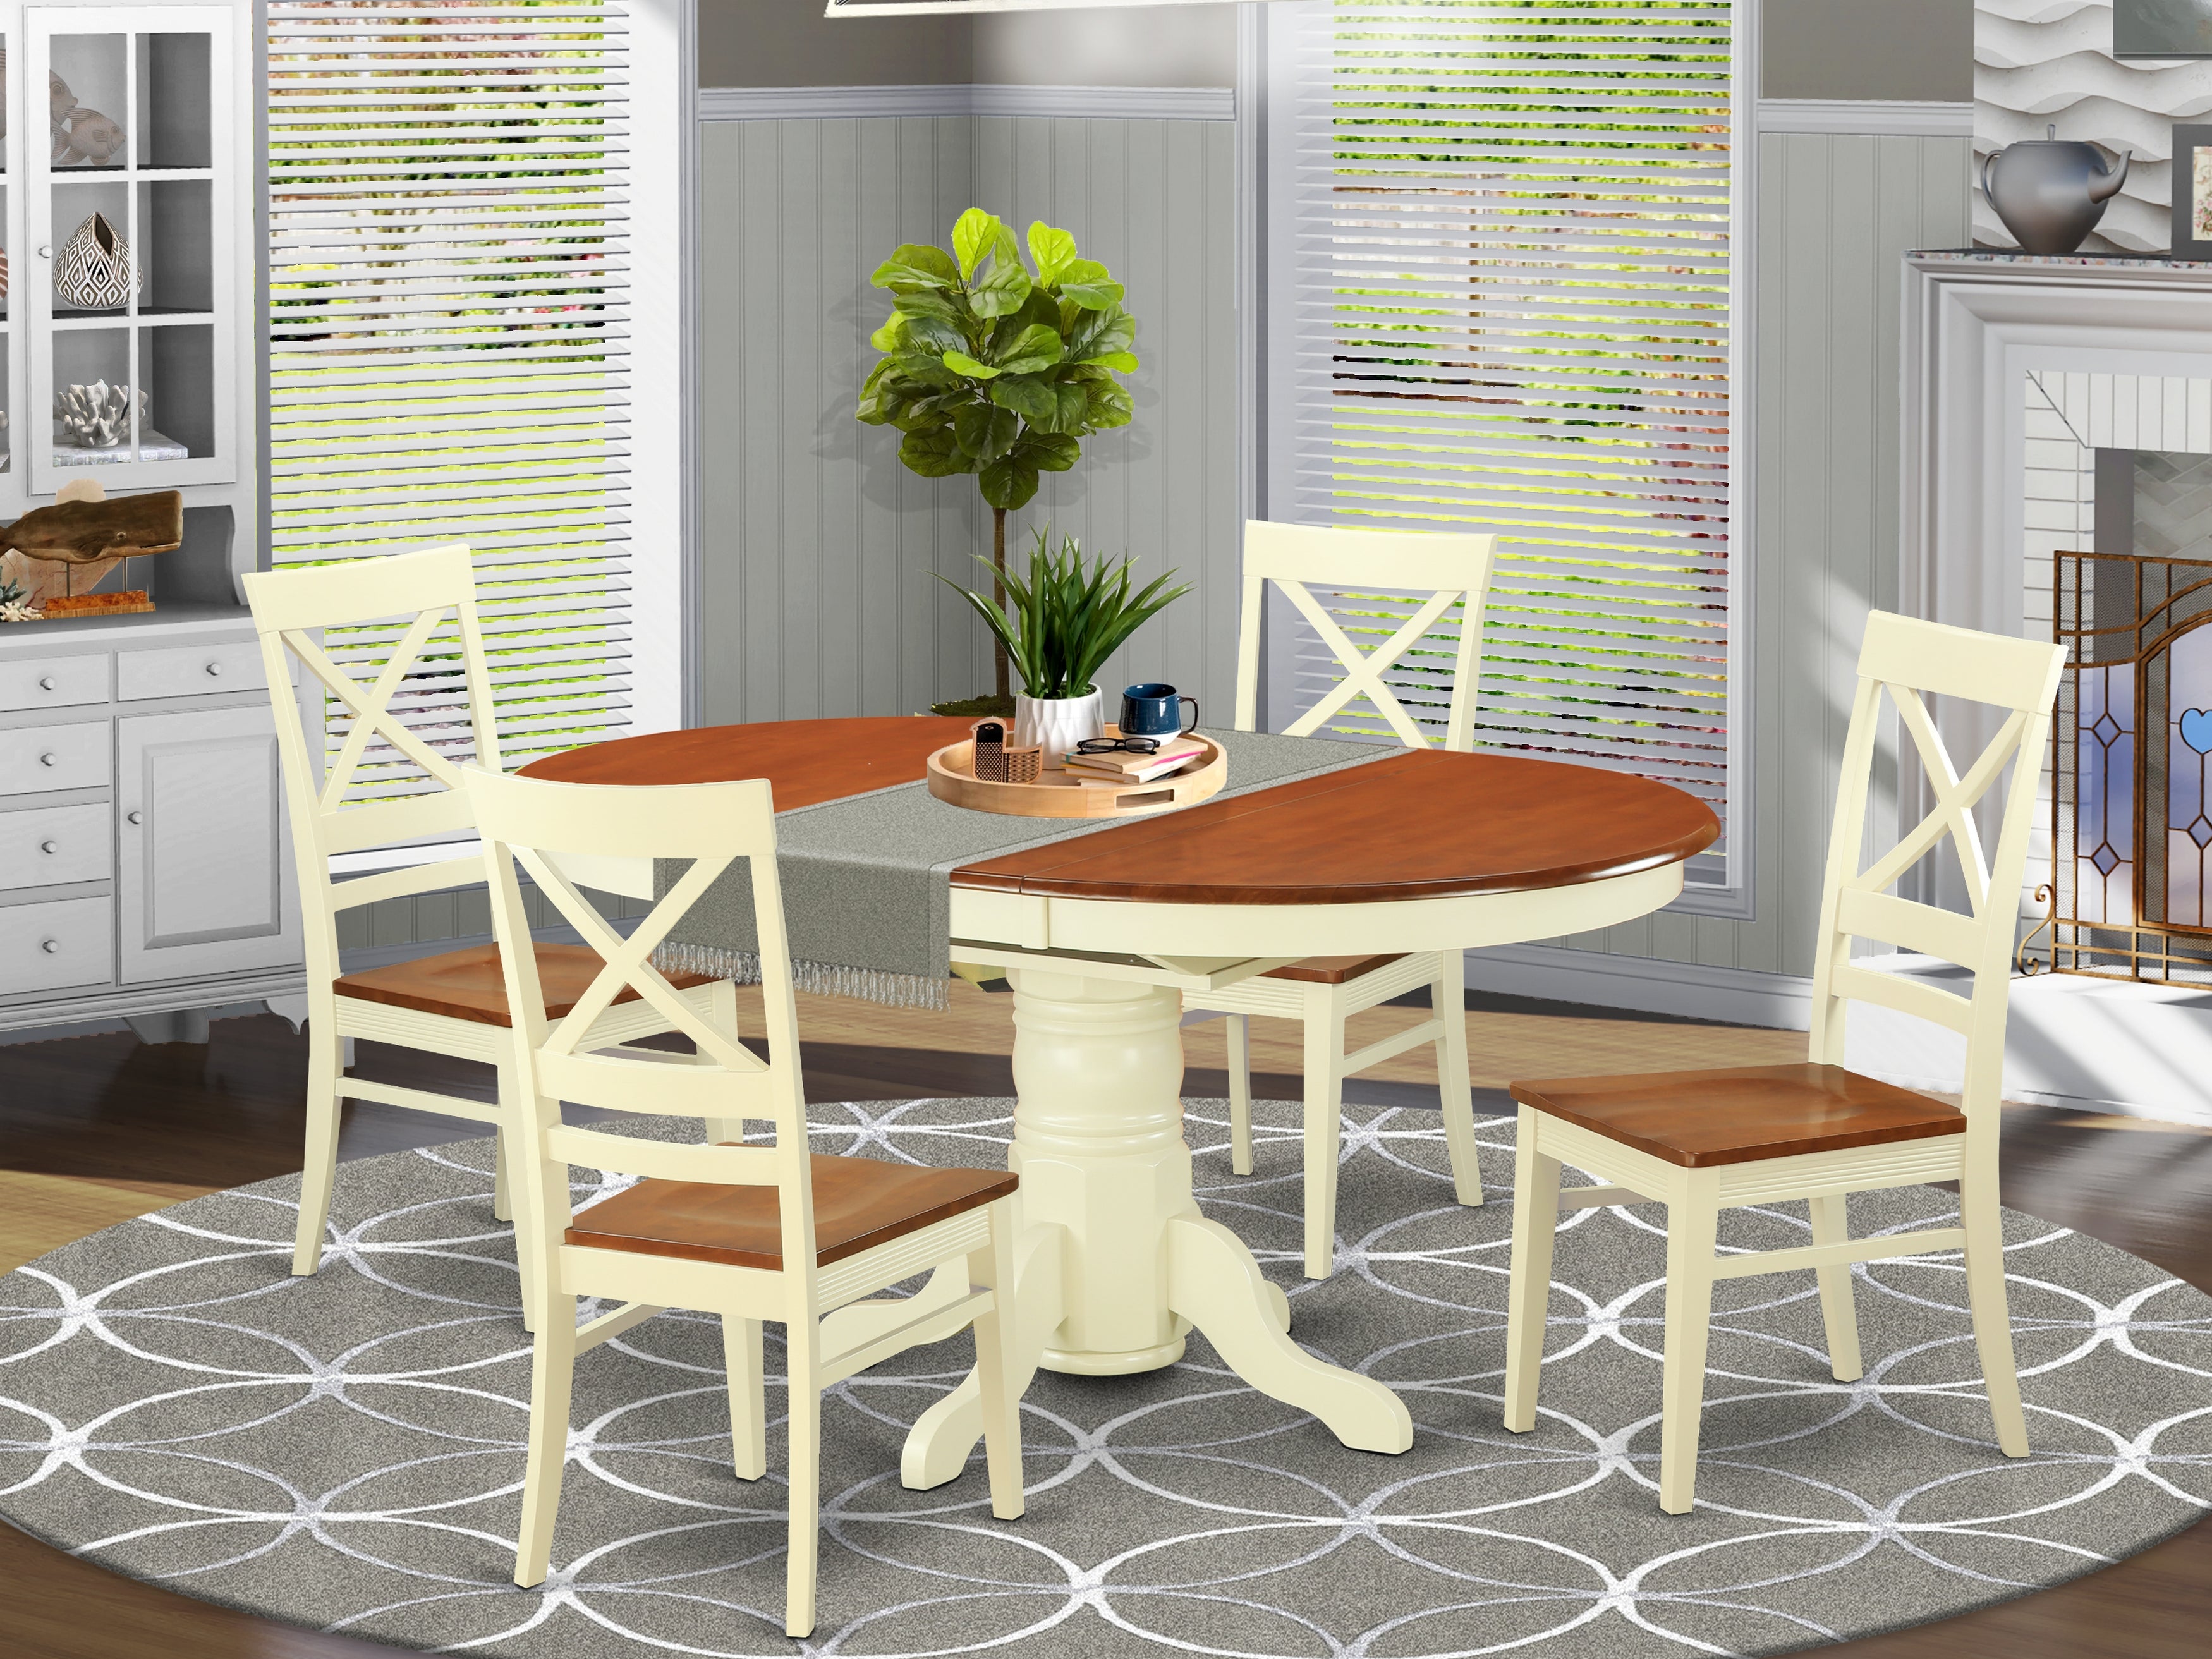 AVQU5-WHI-W 5 PC Table and chair set - Dining Table and 4 Kitchen Dining Chairs